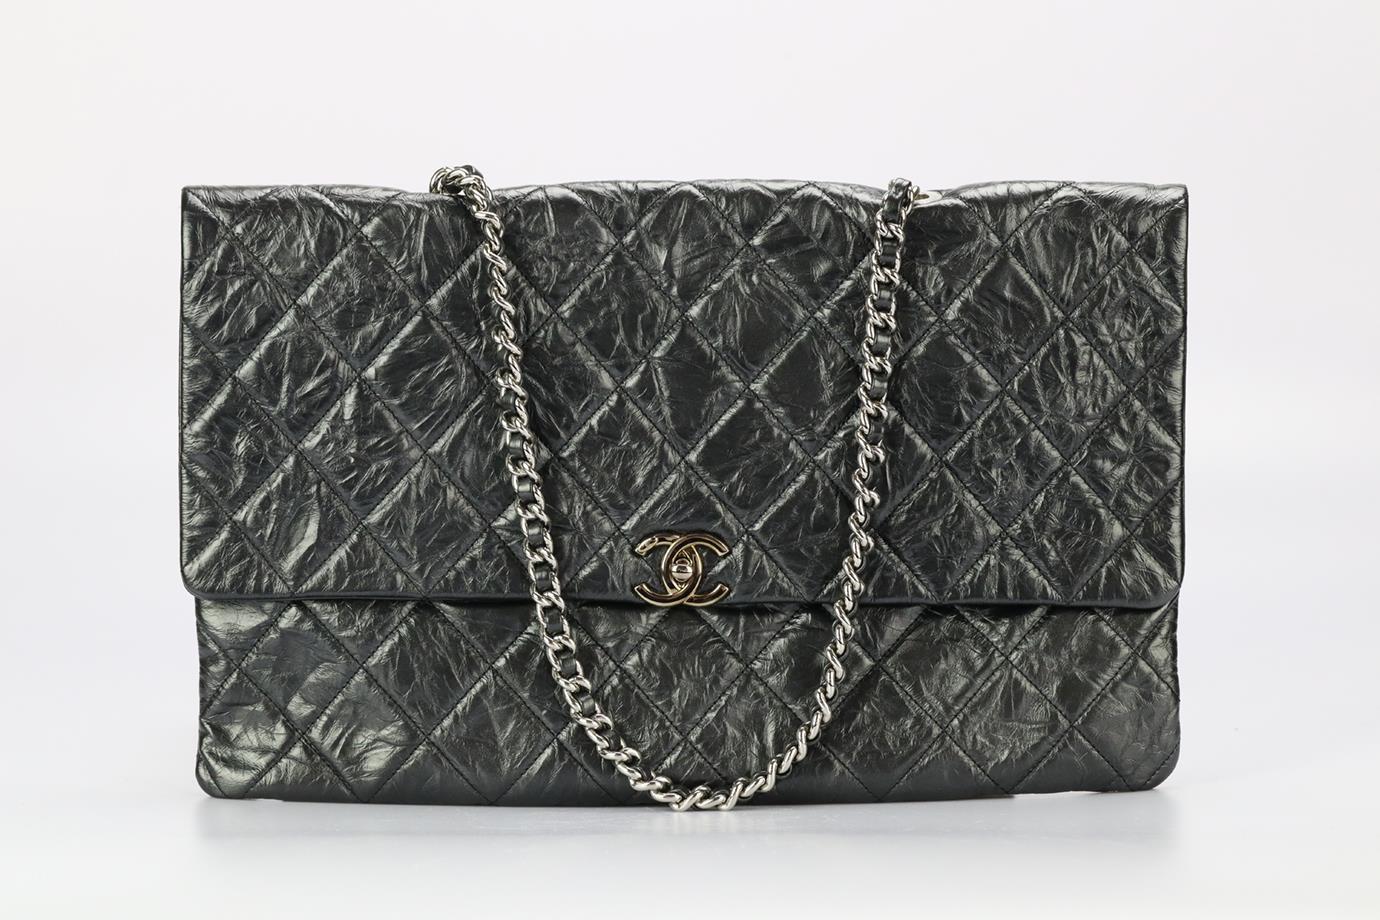 Chanel 2017 Bing Bang Flap Quilted Leather Shoulder Bag. Black. Twist lock fastening - Front. Comes with - dustbag and authenticity card. Height: 9.9 in. Width: 15.8 in. Depth: 0.3 in. Strap drop: 10.8 in. Condition: Used. Very good condition - Few